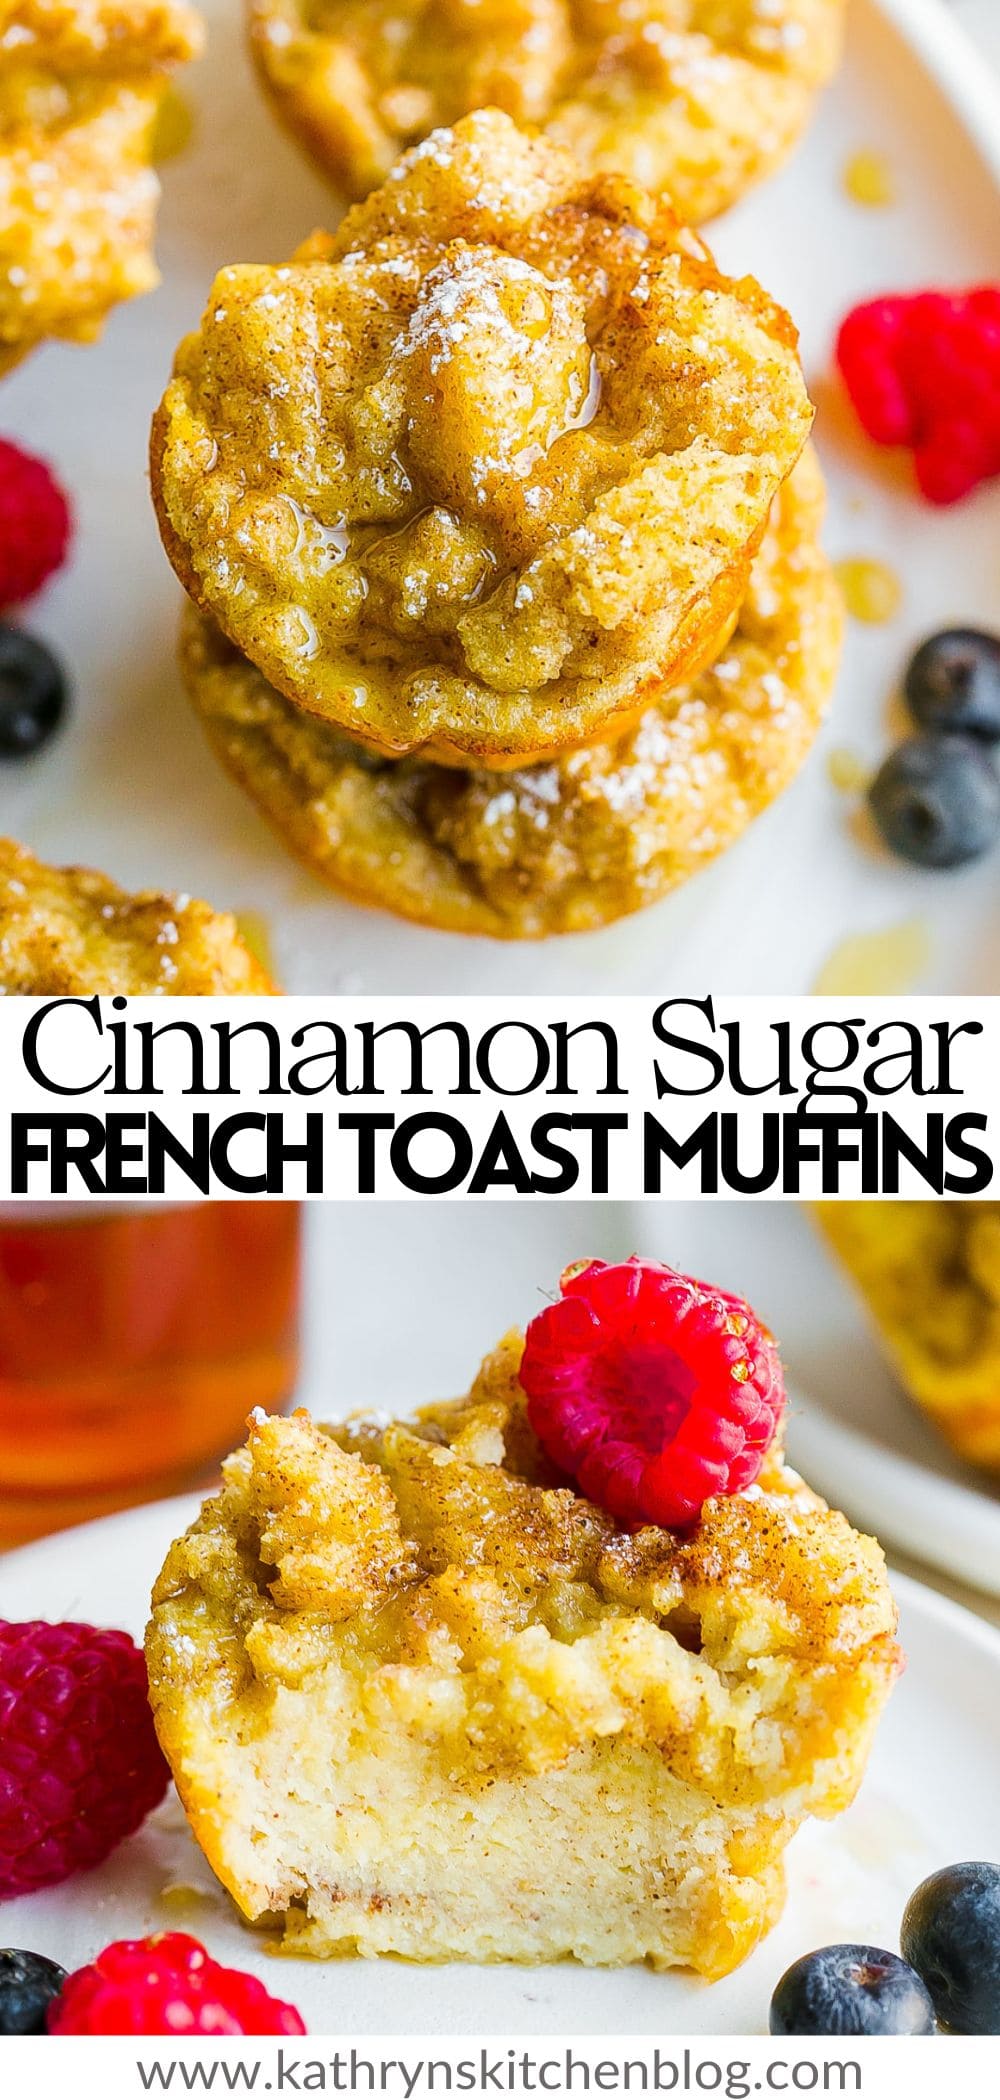 Baked French Toast Muffins (With Cinnamon Sugar Topping)